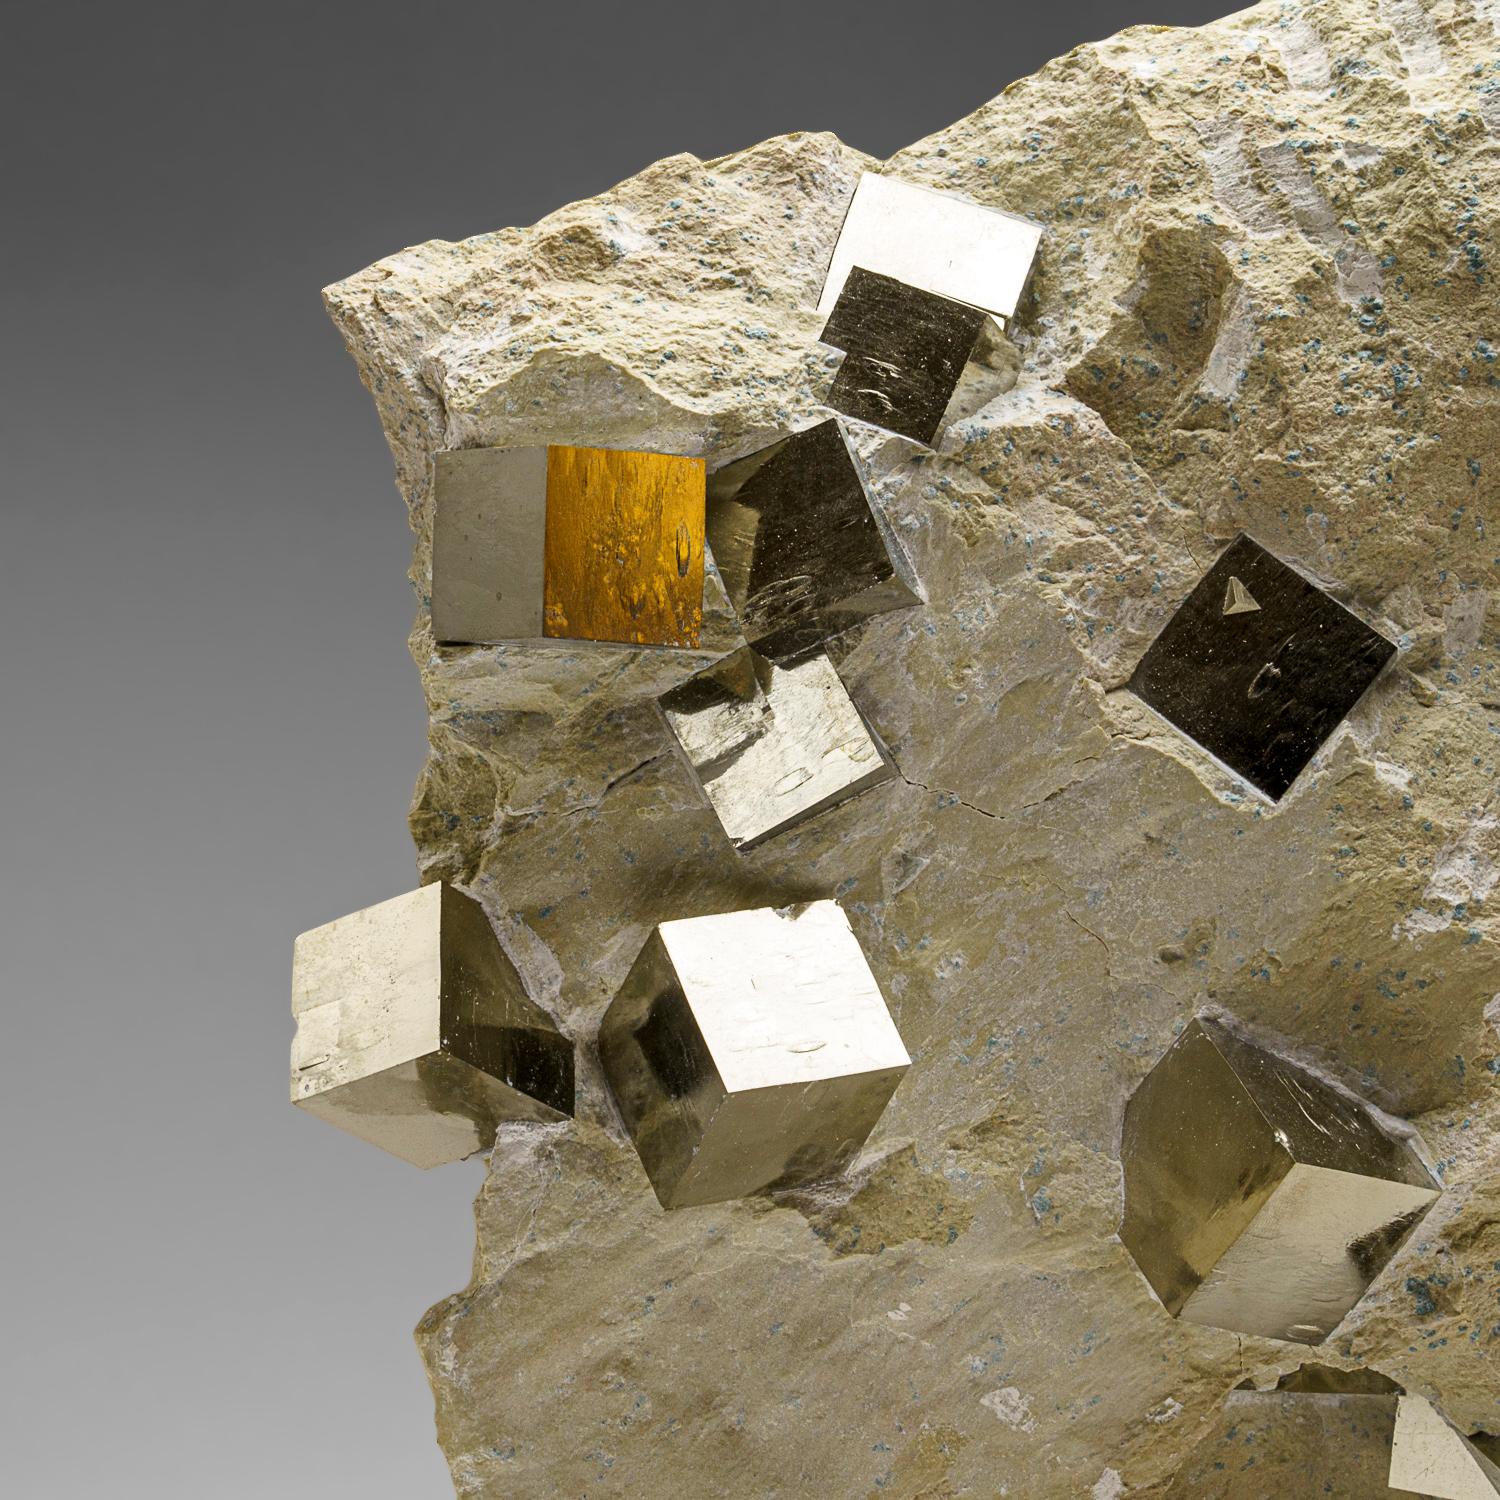 A world-class cluster of perfectly terminated cubic Pyrite crystals, interlocked on it's natural basalt matrix. This is an extremely large and unique piece - as less than a handful are found per year. This piece was discovered in Navajun, Spain -